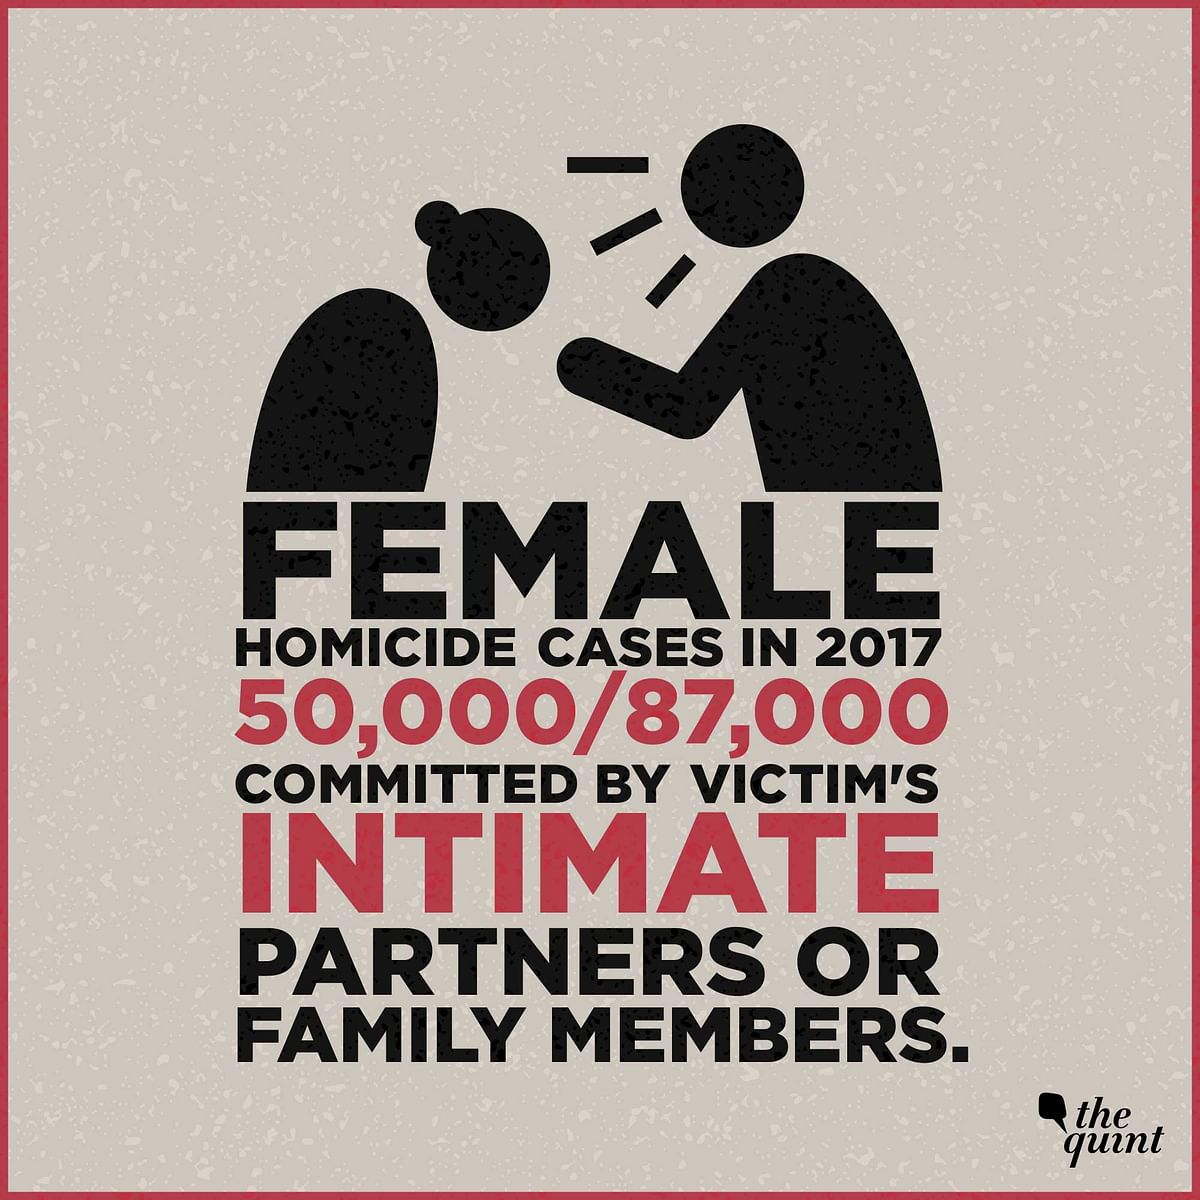 More than half the women who were murdered worldwide last year were killed by their partners or family members.